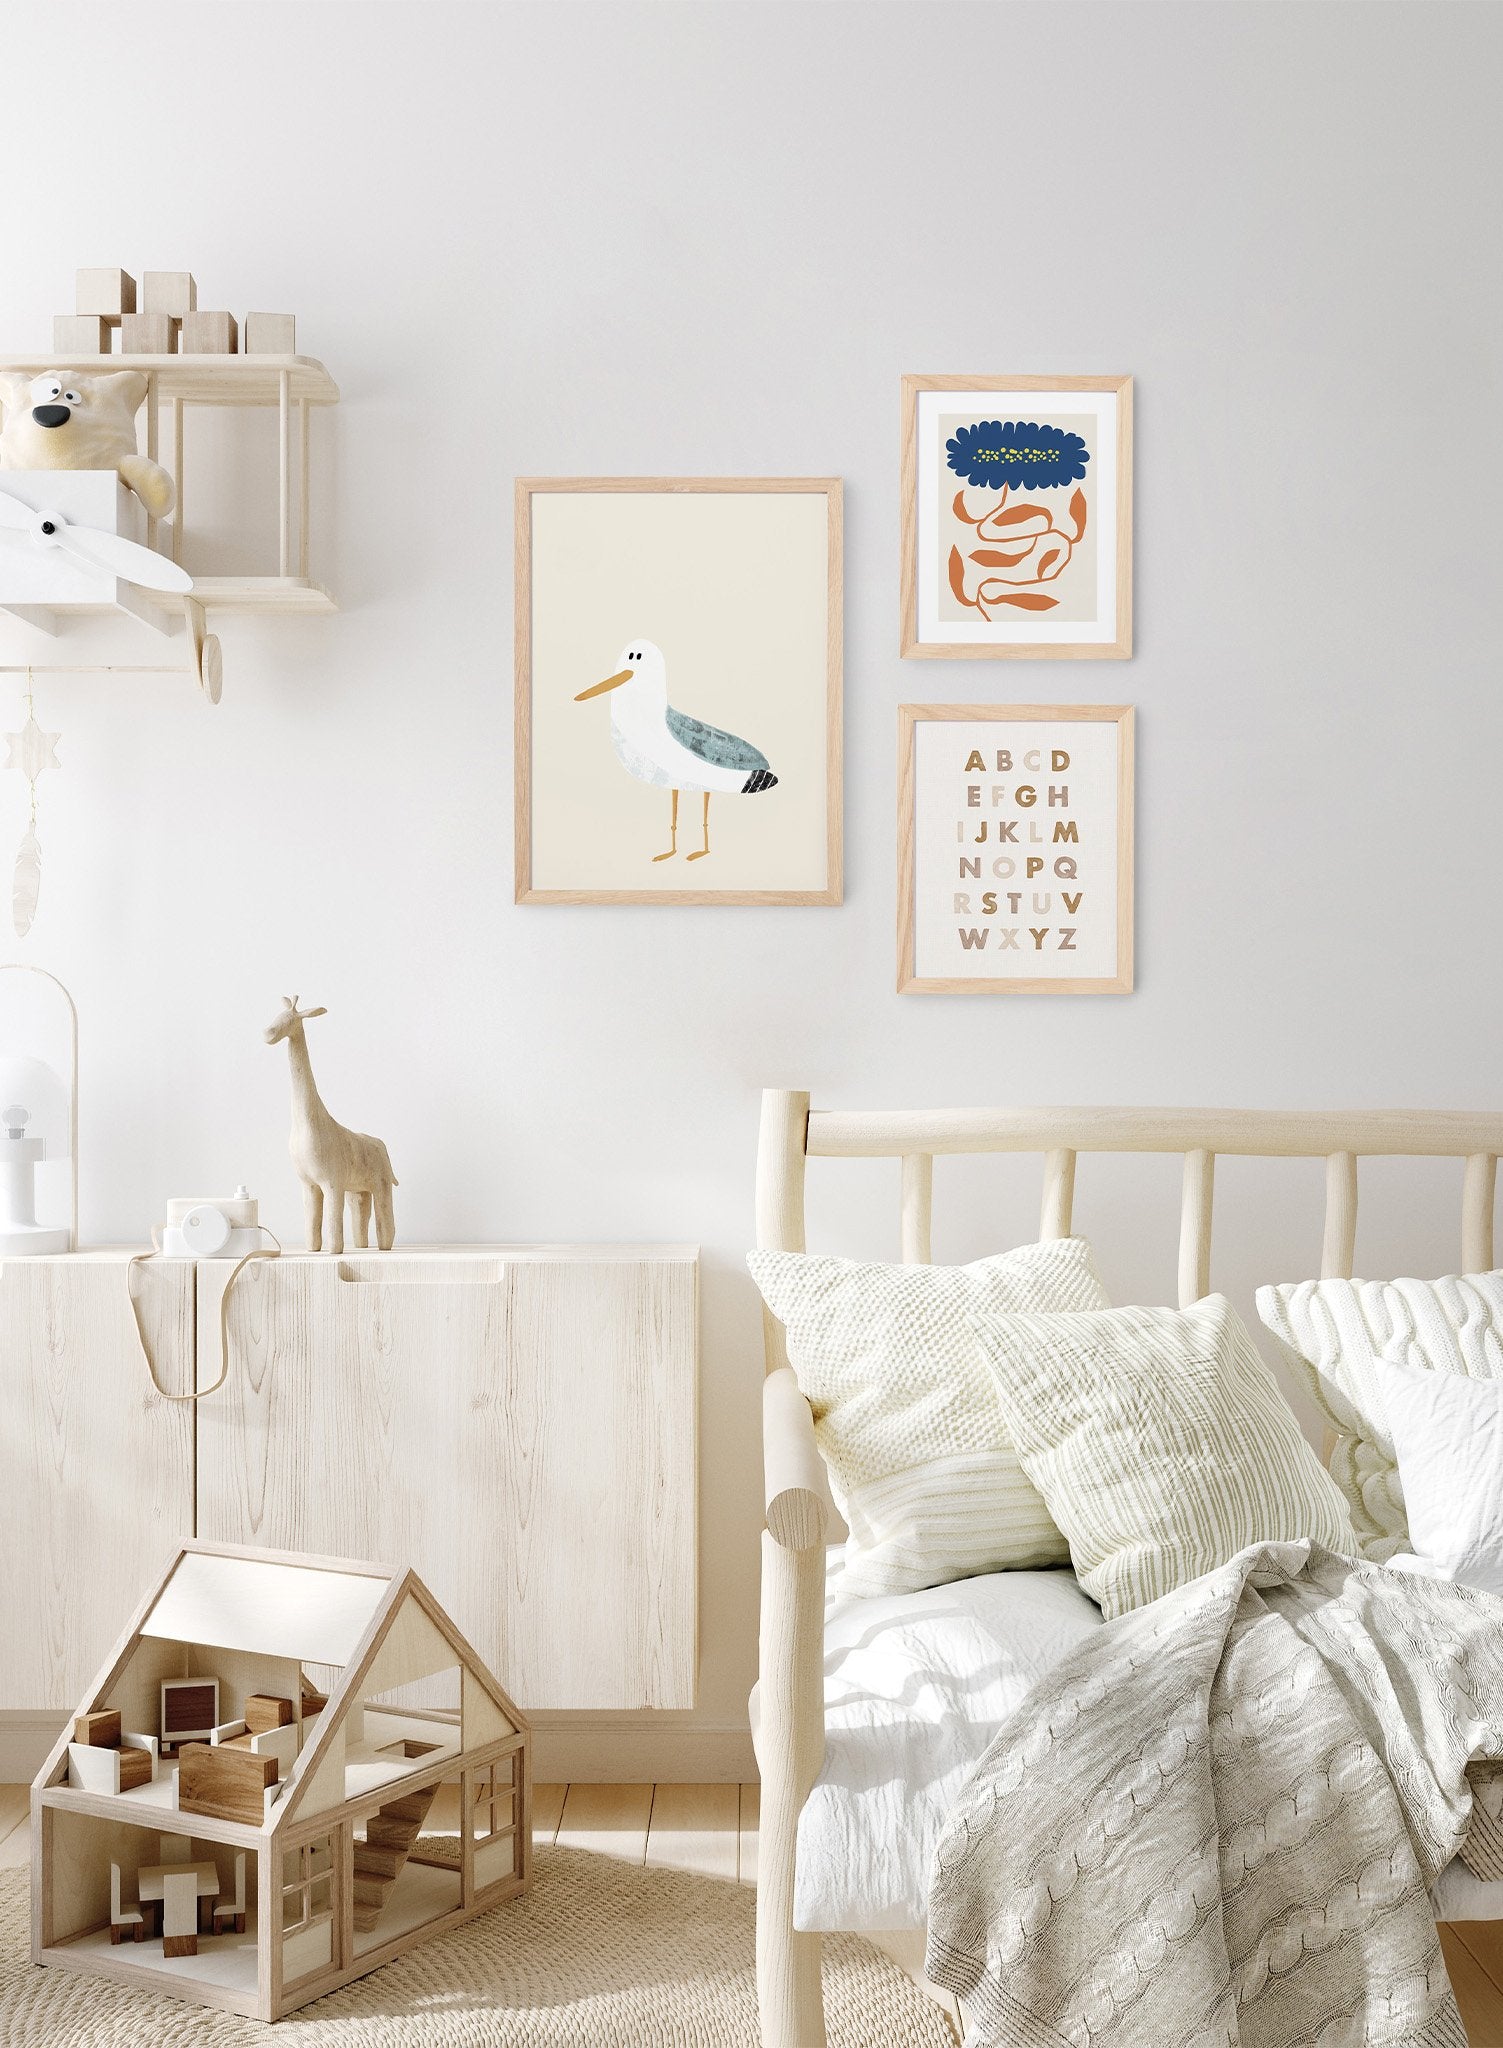 Sweet Seagull is a minimalist illustration of a white seagull with teal-coloured wings starring at the observer by Opposite Wall.